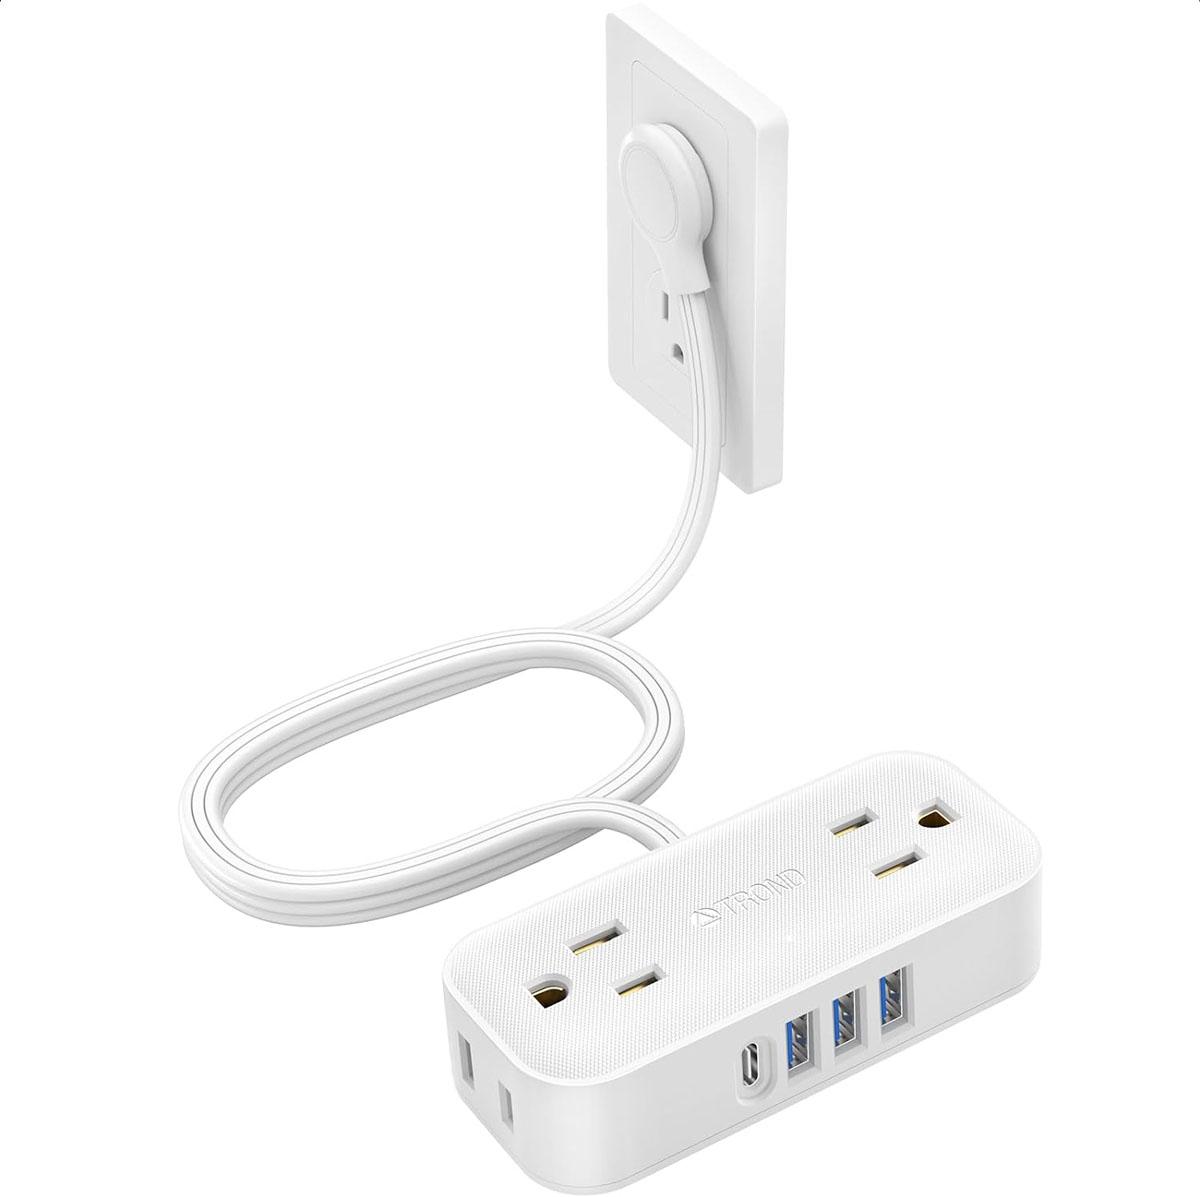 Trond 8-in-1 Travel Power Strip Flat Plug Extension Cord for $9.99